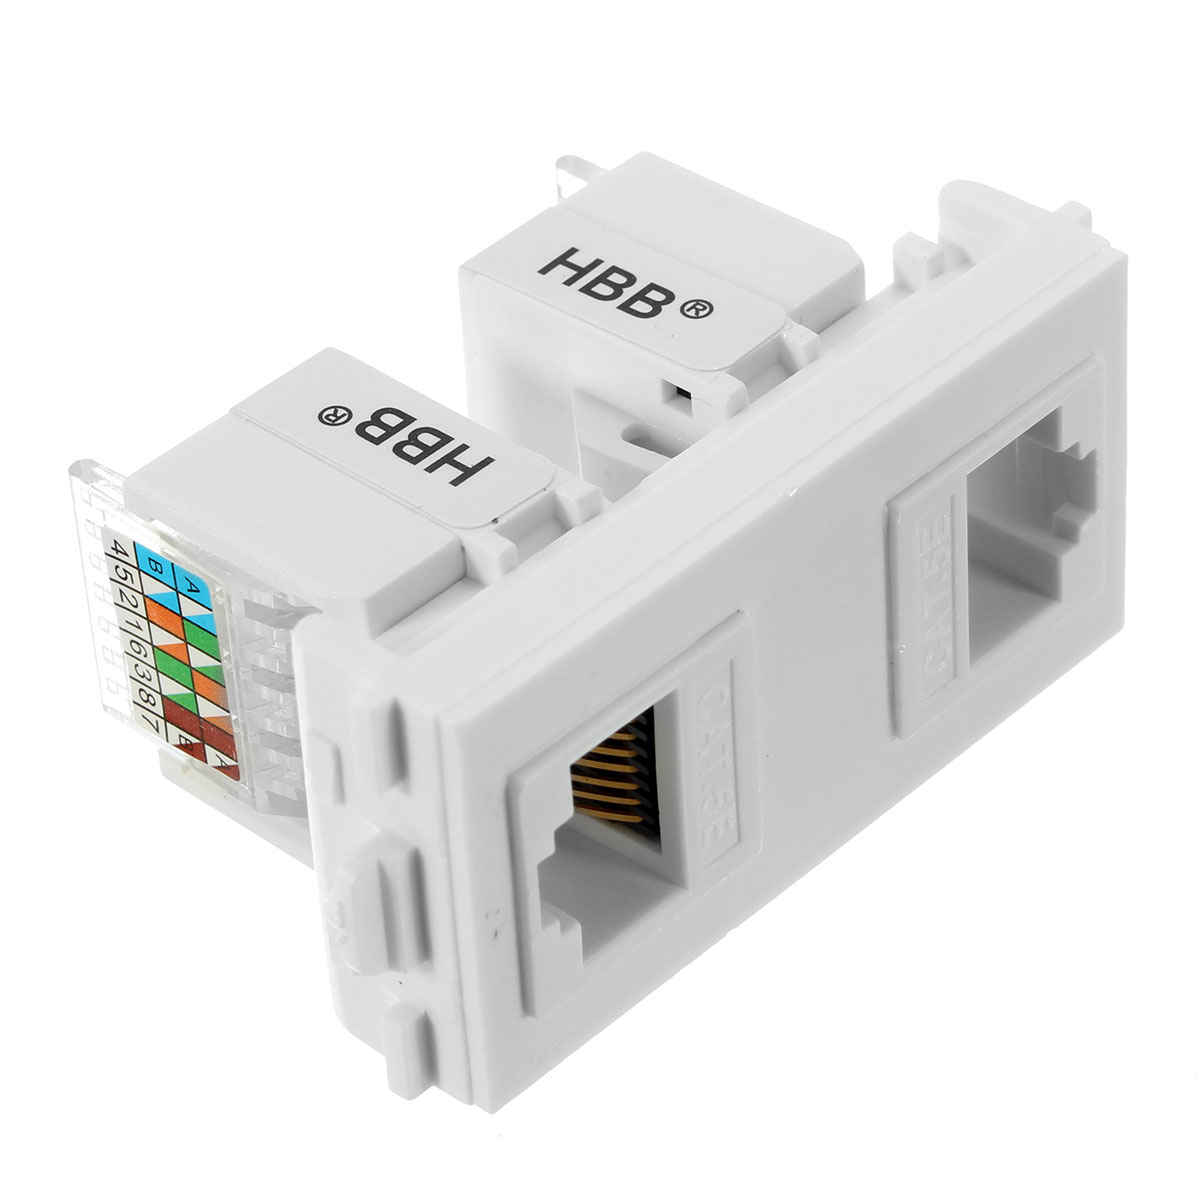 RJ45-Wall-Plate-Dual-Port-Socket-Panel-Building-Materials-Network-Combination-Connector-Module-1401148-1